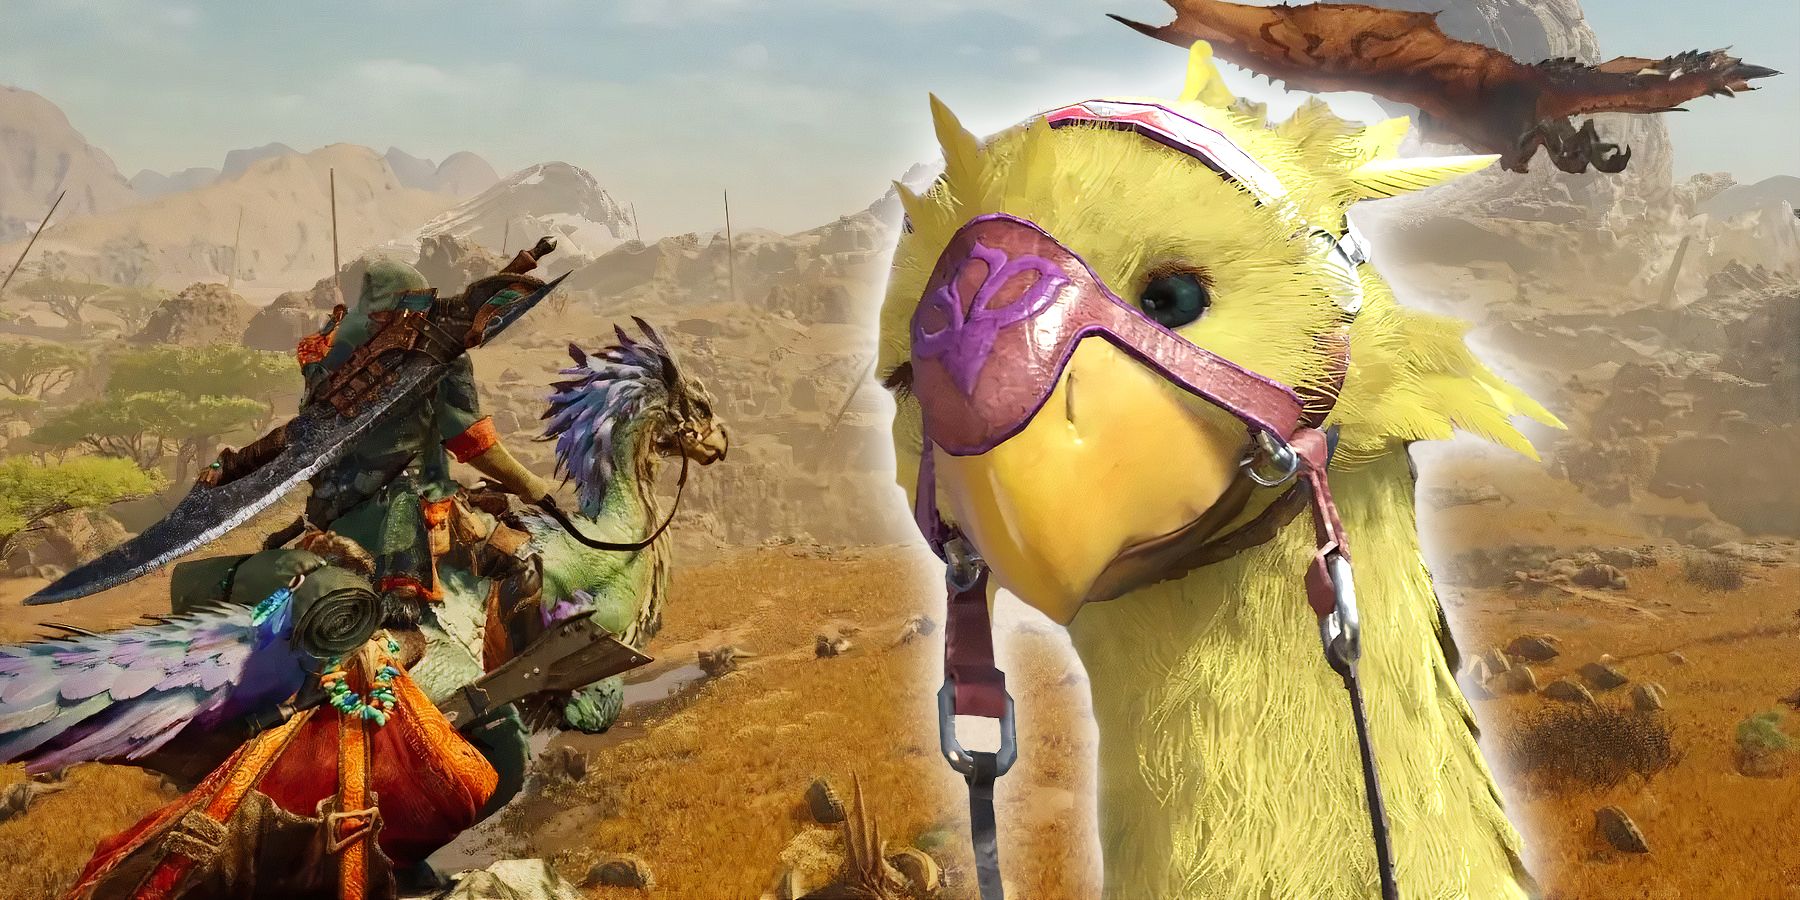 Chocobo from Final Fantasy 7 Rebirth over Monster Hunter Wilds background